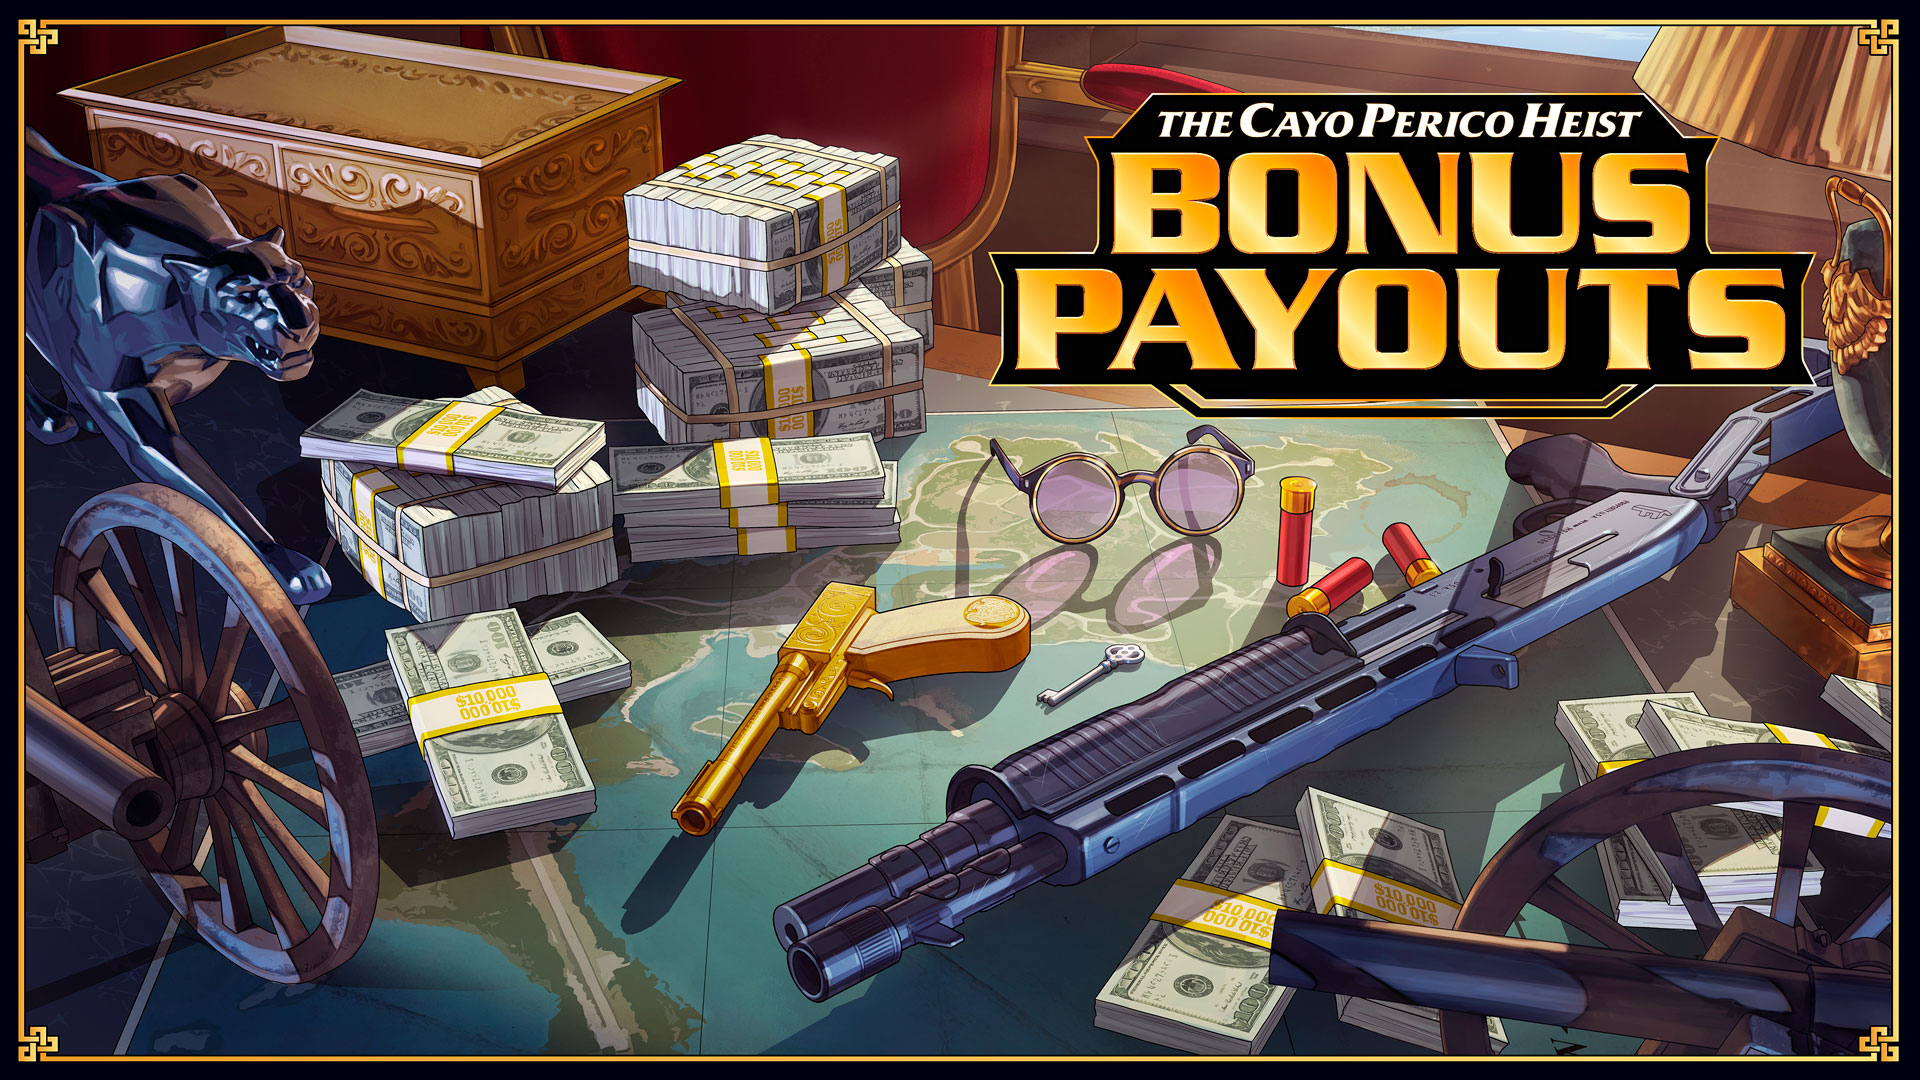 Get a 50 Bonus Payout on The Cayo Perico Heist Finale Rockstar Games